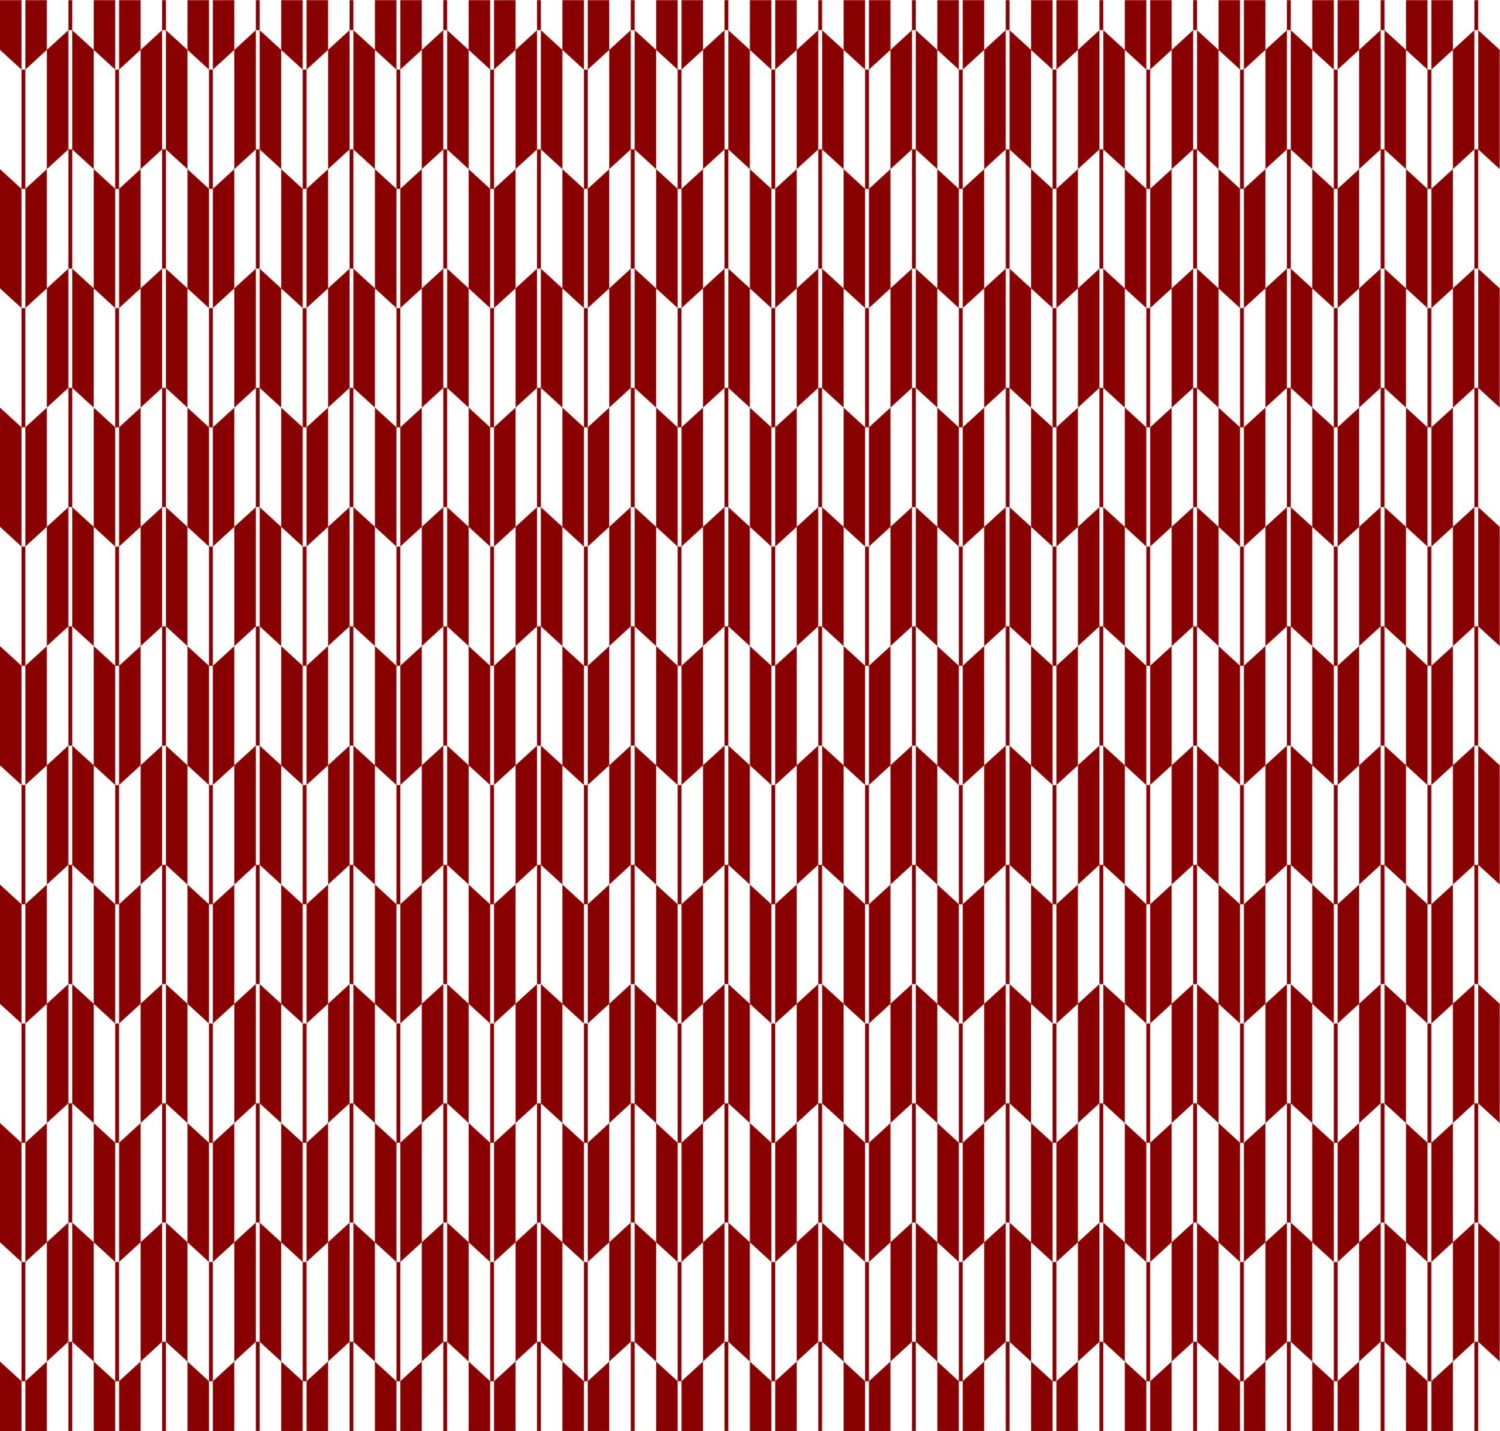 yagasuri pattern, repeated arrowheads in red and white